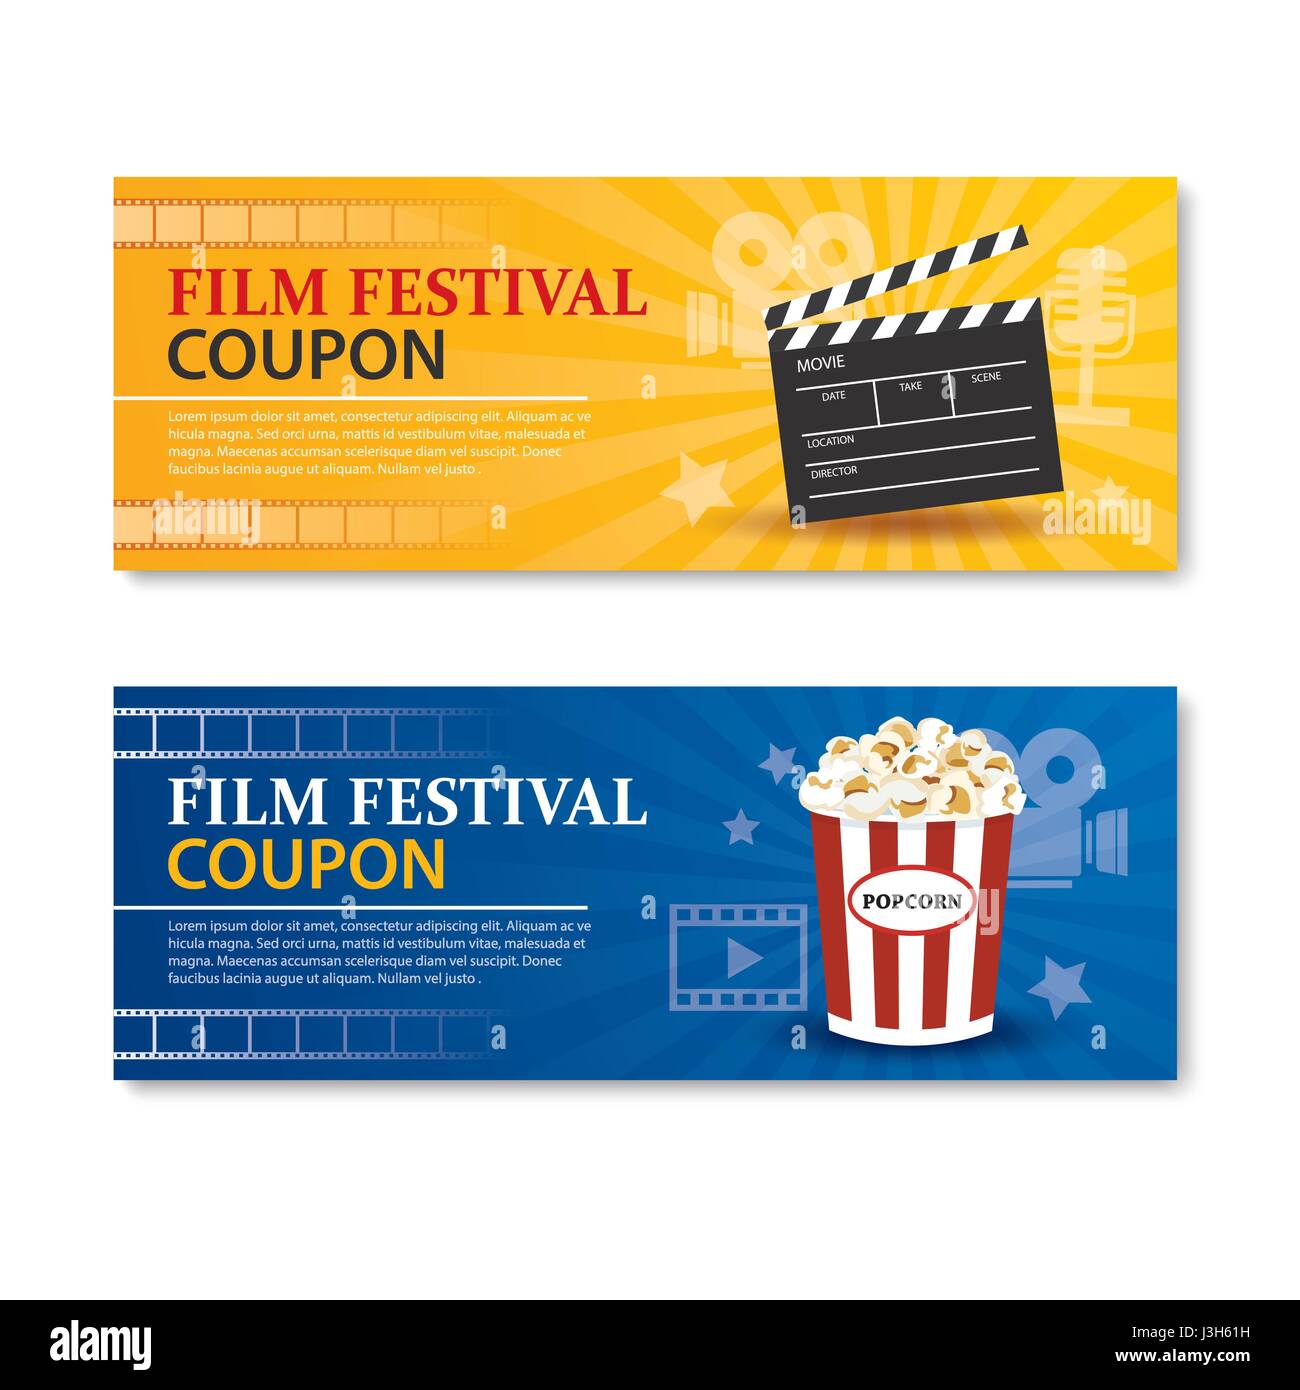 Film festival banner and coupon.Cinema movie card element design. Stock Vector